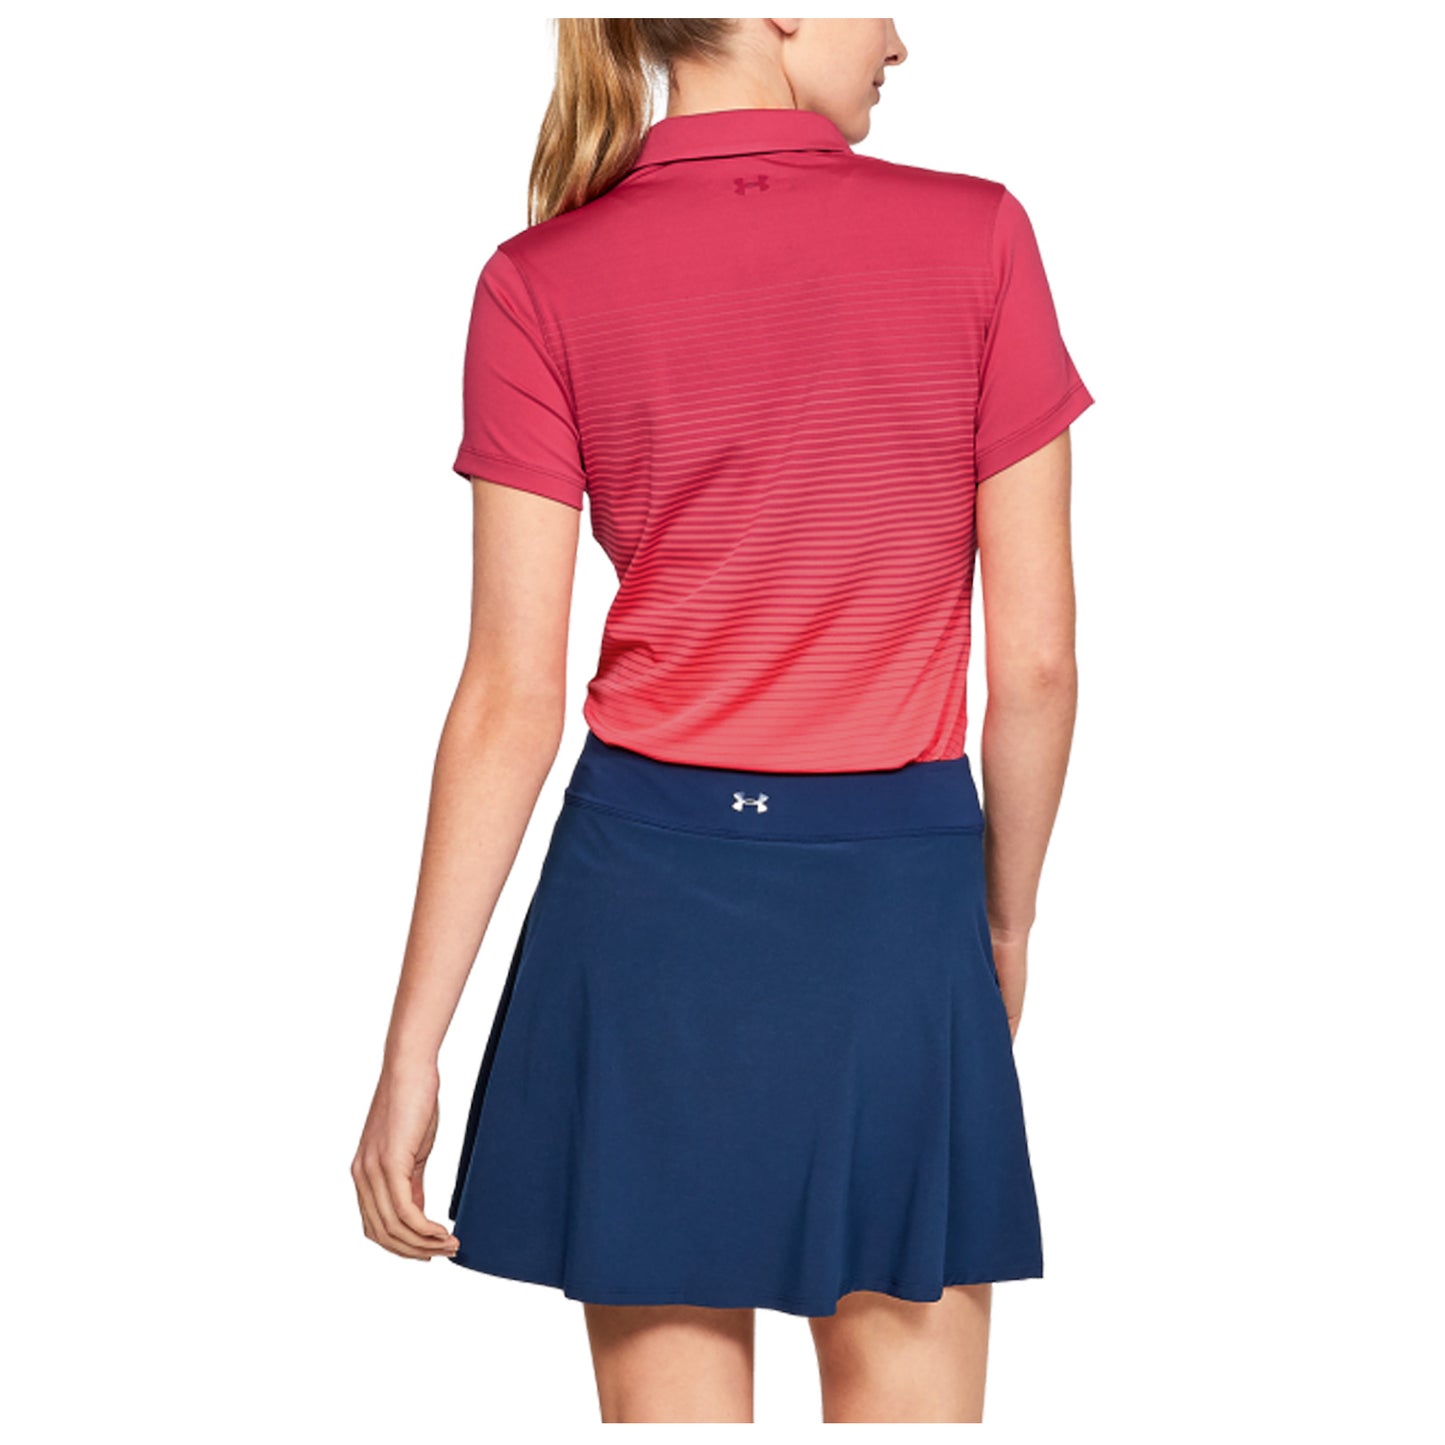 Under Armour Ladies Zinger Novelty Polo Shirt